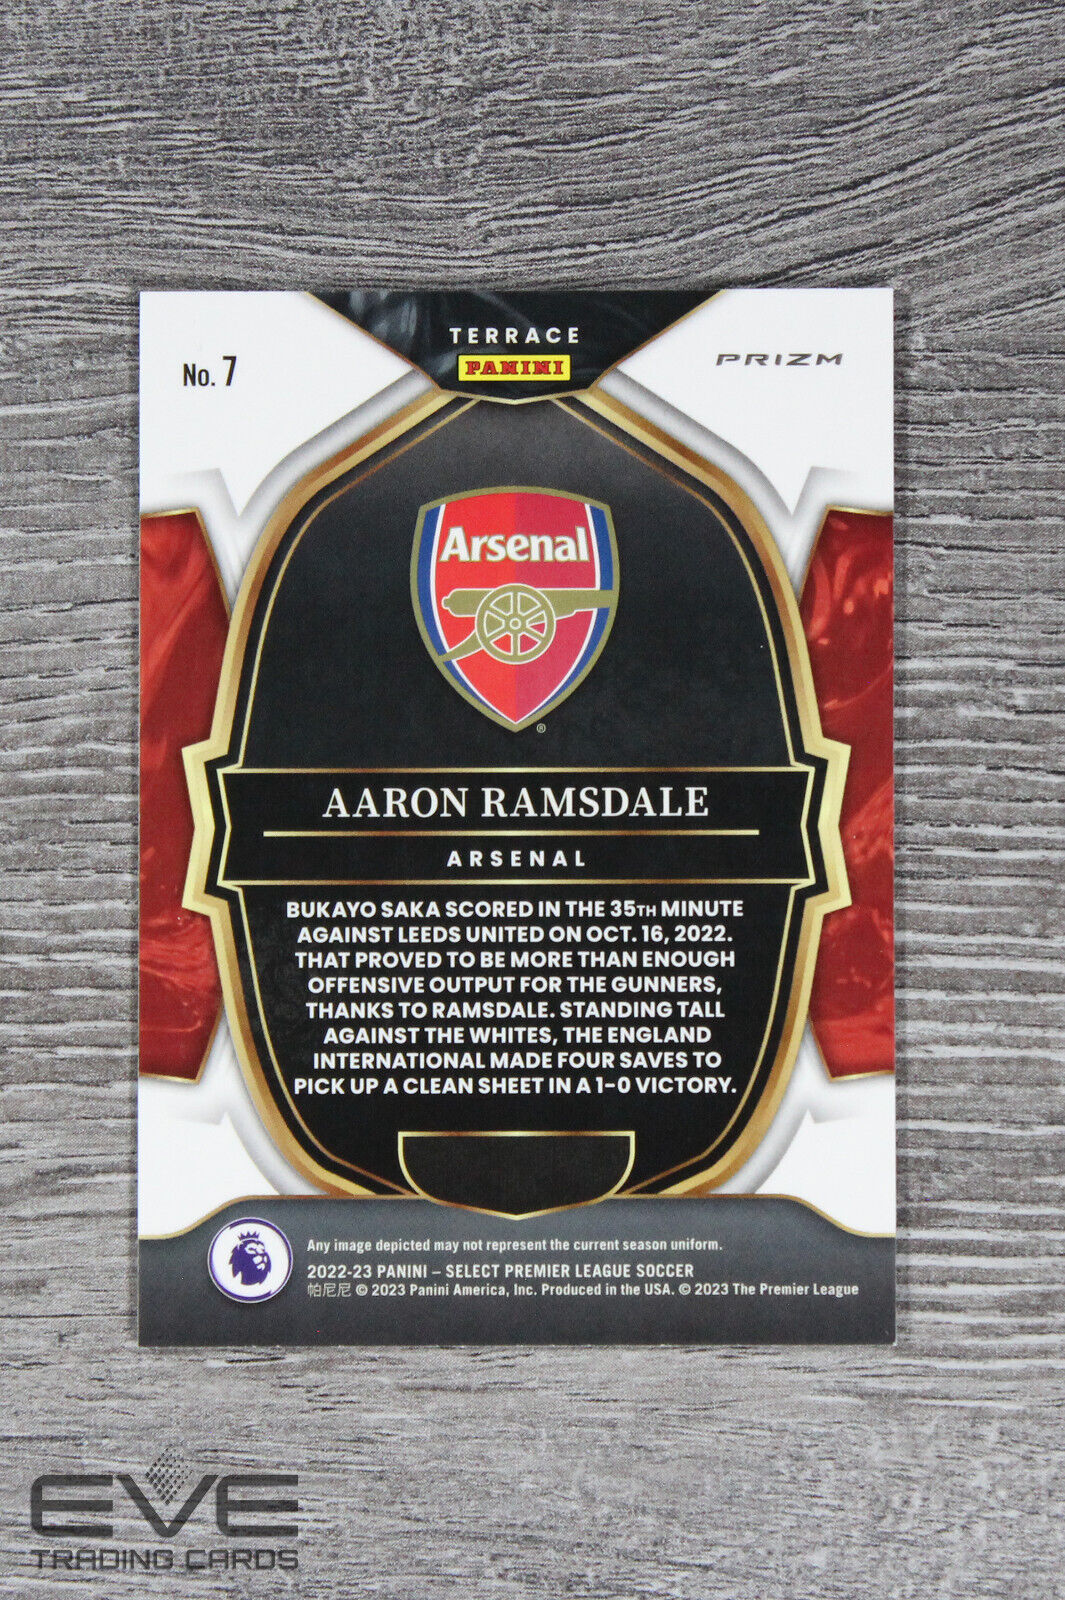 2022-23 Panini Select EPL Soccer Card #7 Aaron Ramsdale Multicolour Prizm NM/M